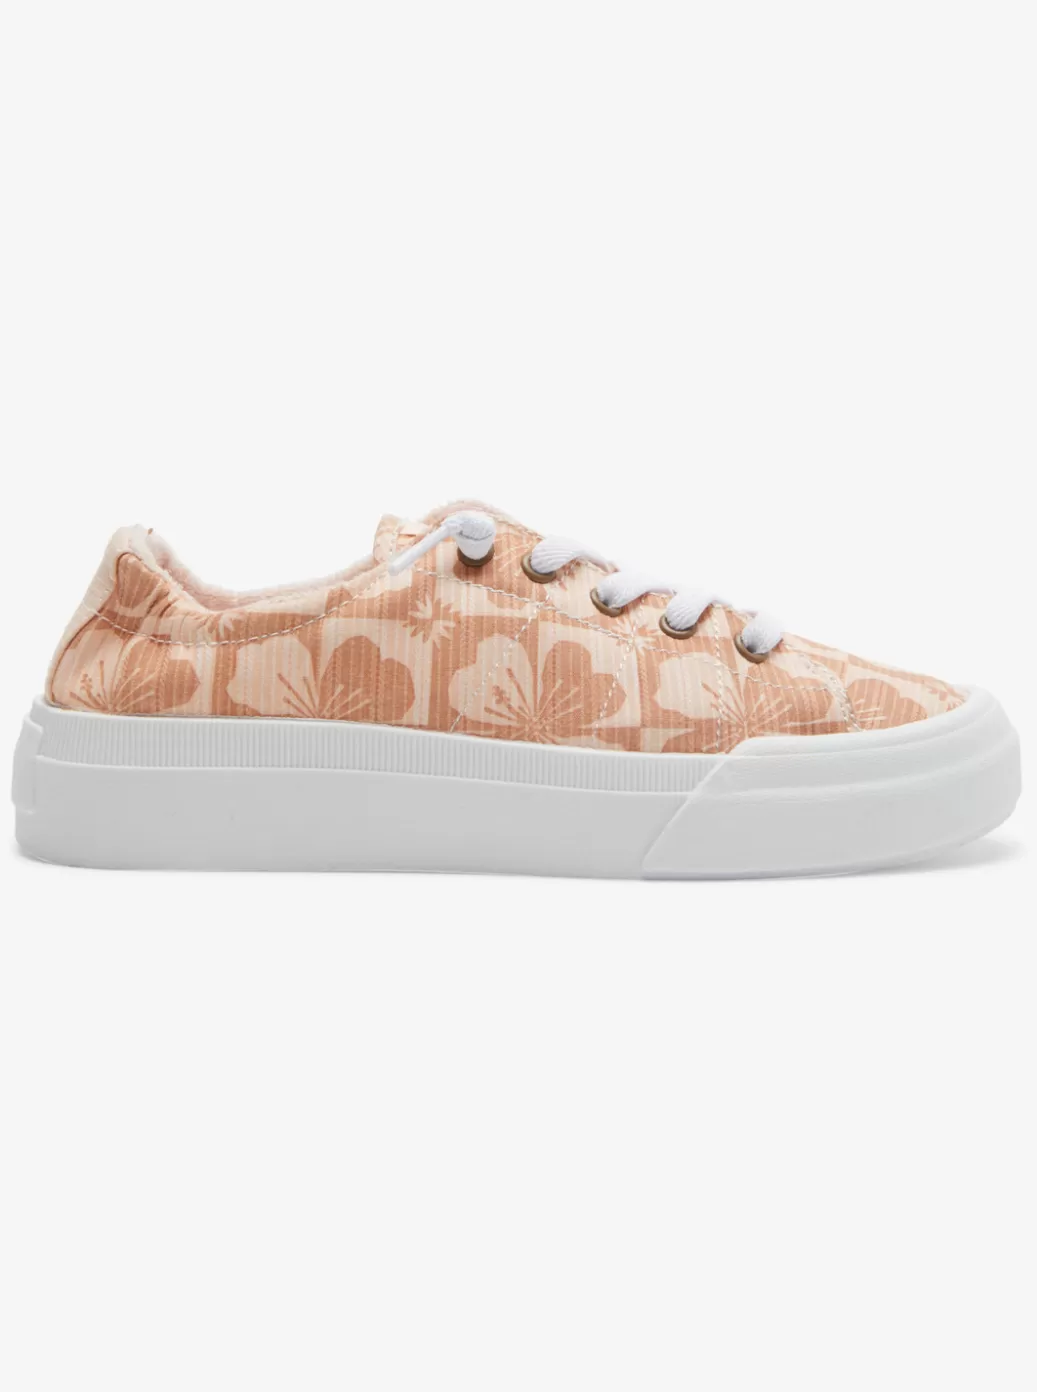 Sneakers | WOMEN ROXY Rae Shoes Natural